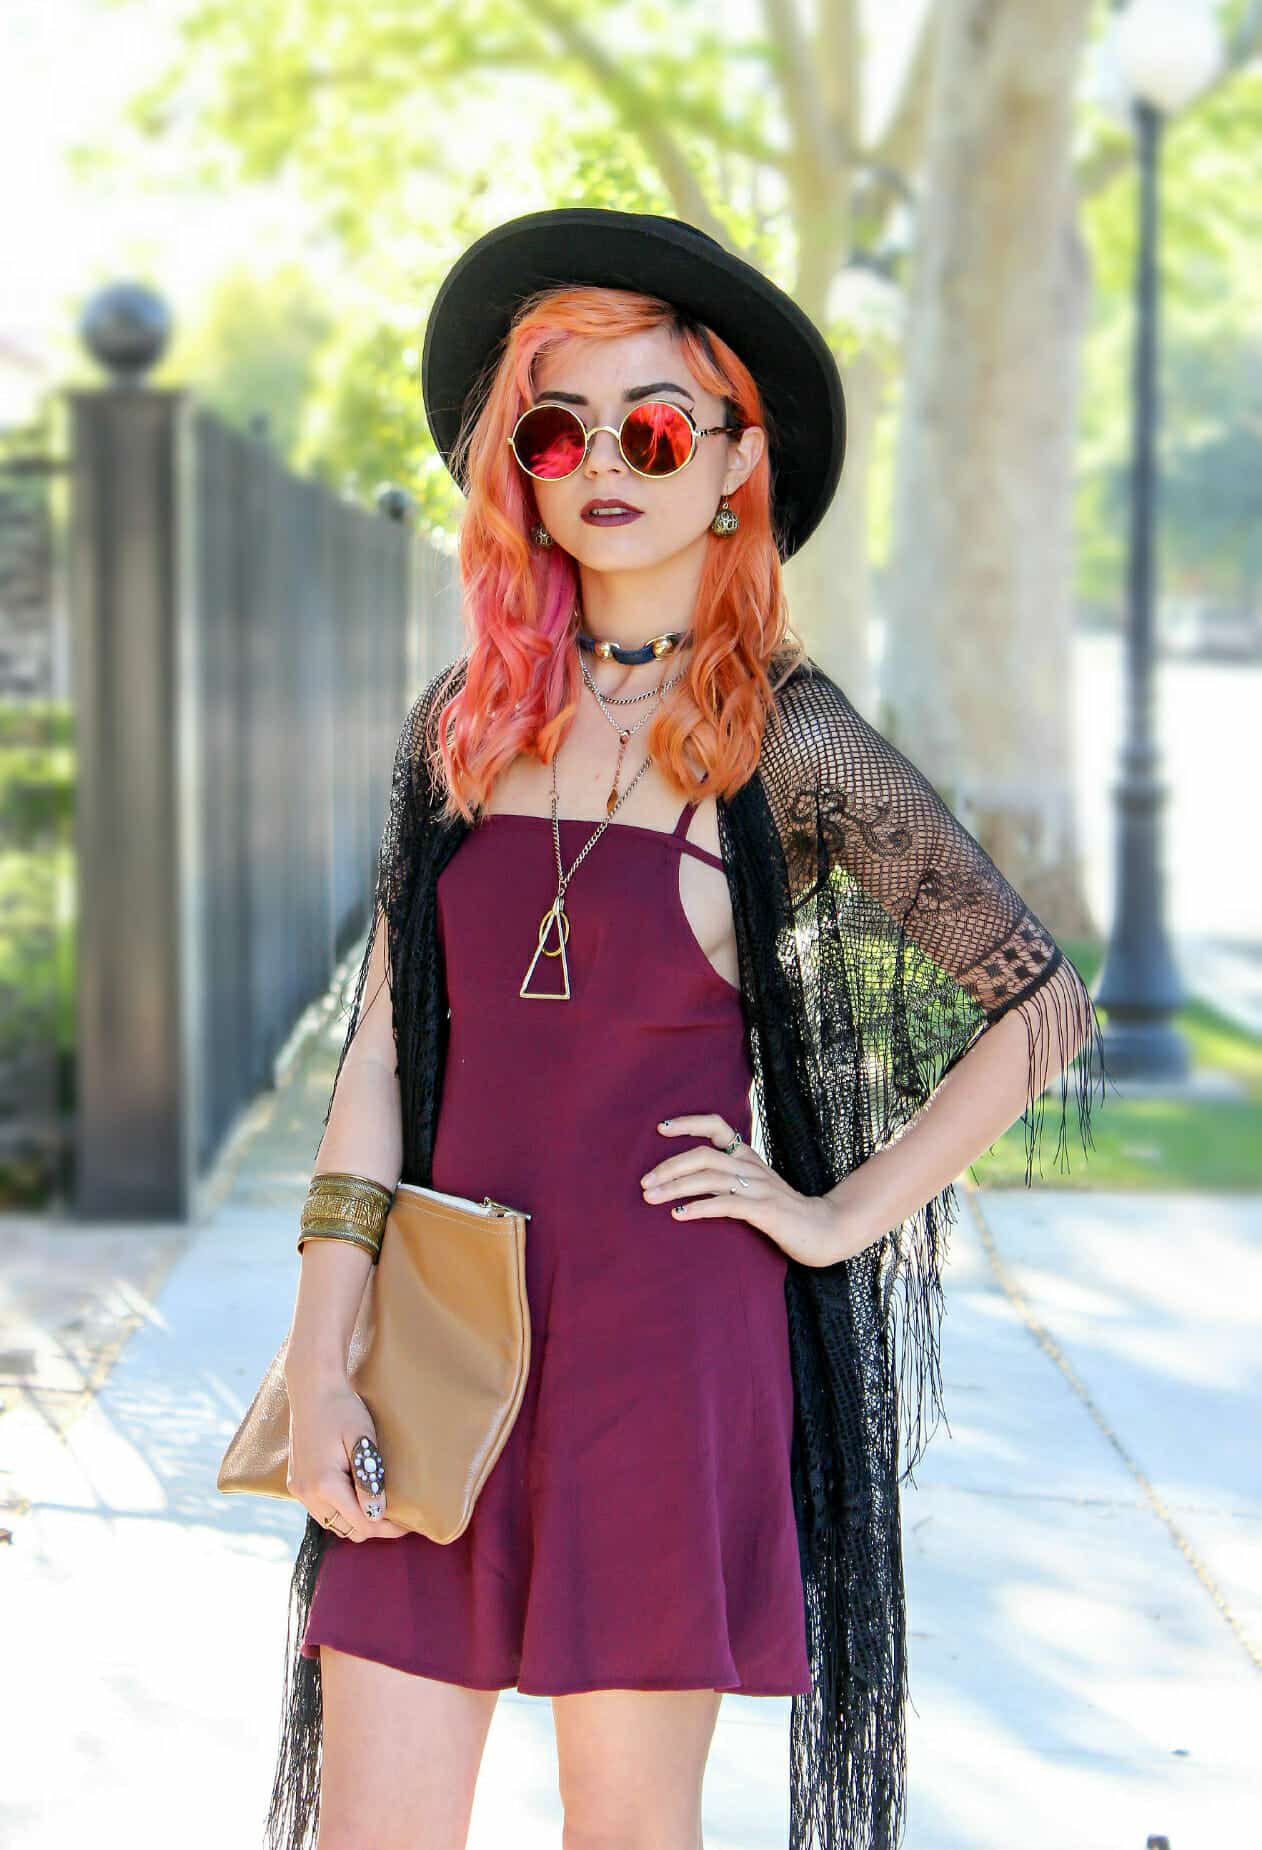 Oriana Shift dress in deep purple, a copper necklace, a thrifted leather clutch, black lace shawl, reflective round sunglasses, and round black felt-hat